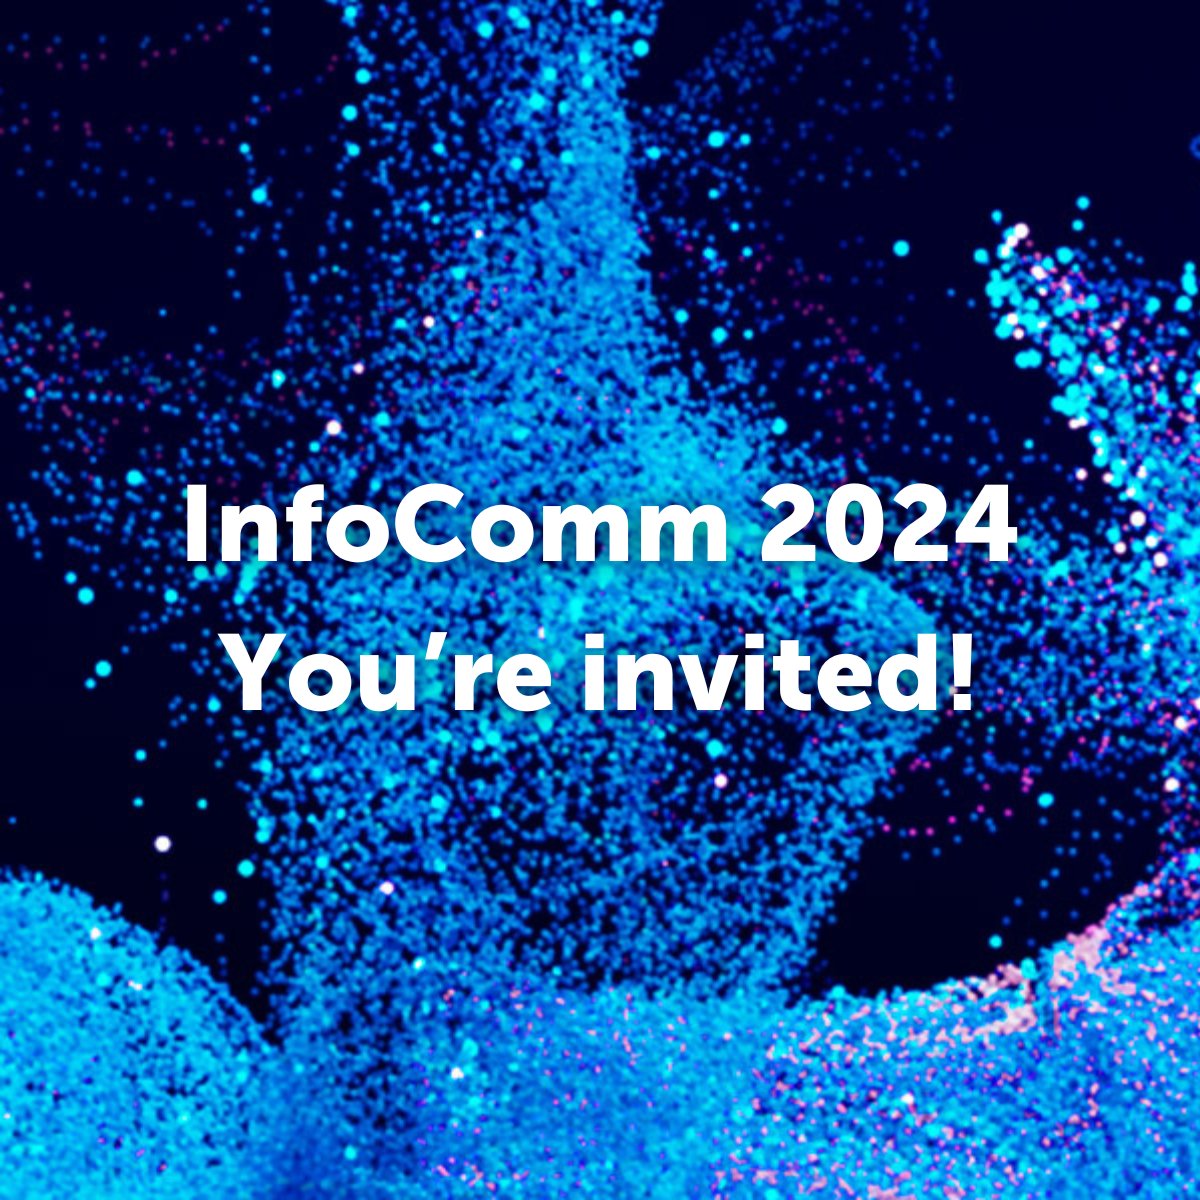 🎡 We're gearing up to bring the excitement to @InfoComm with our newest products. Mark your calendars for 3 days of AV buzz from 12 to 14 June! 

➡️ Discover Barco at InfoComm: ow.ly/9ysz50RGP0n

#InfoComm #AVTweeps #innovation